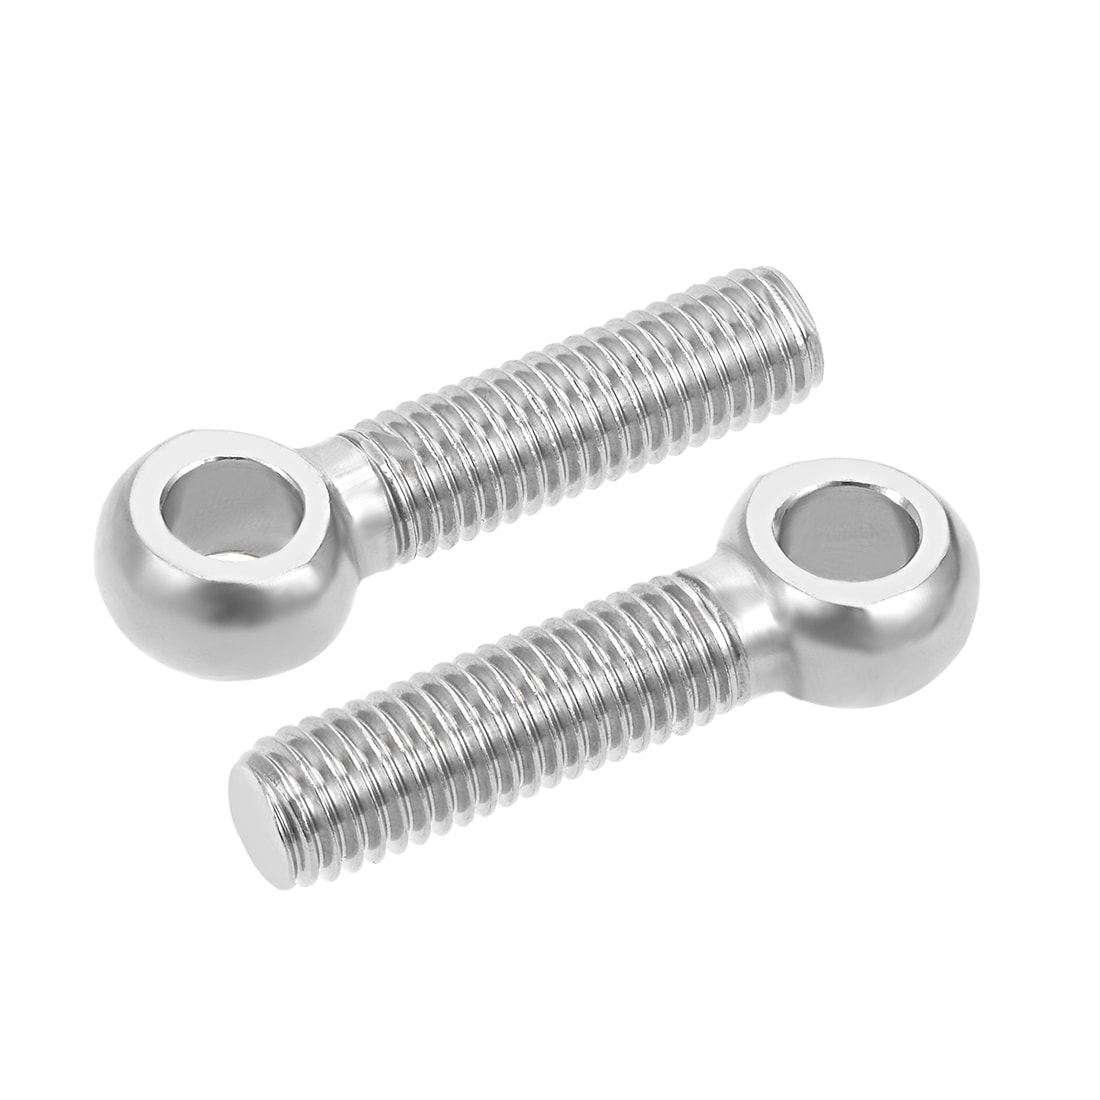 uxcell M6 x 40mm 304 Stainless Steel Machine Shoulder Lift Eye Bolt Rigging 20pcs 